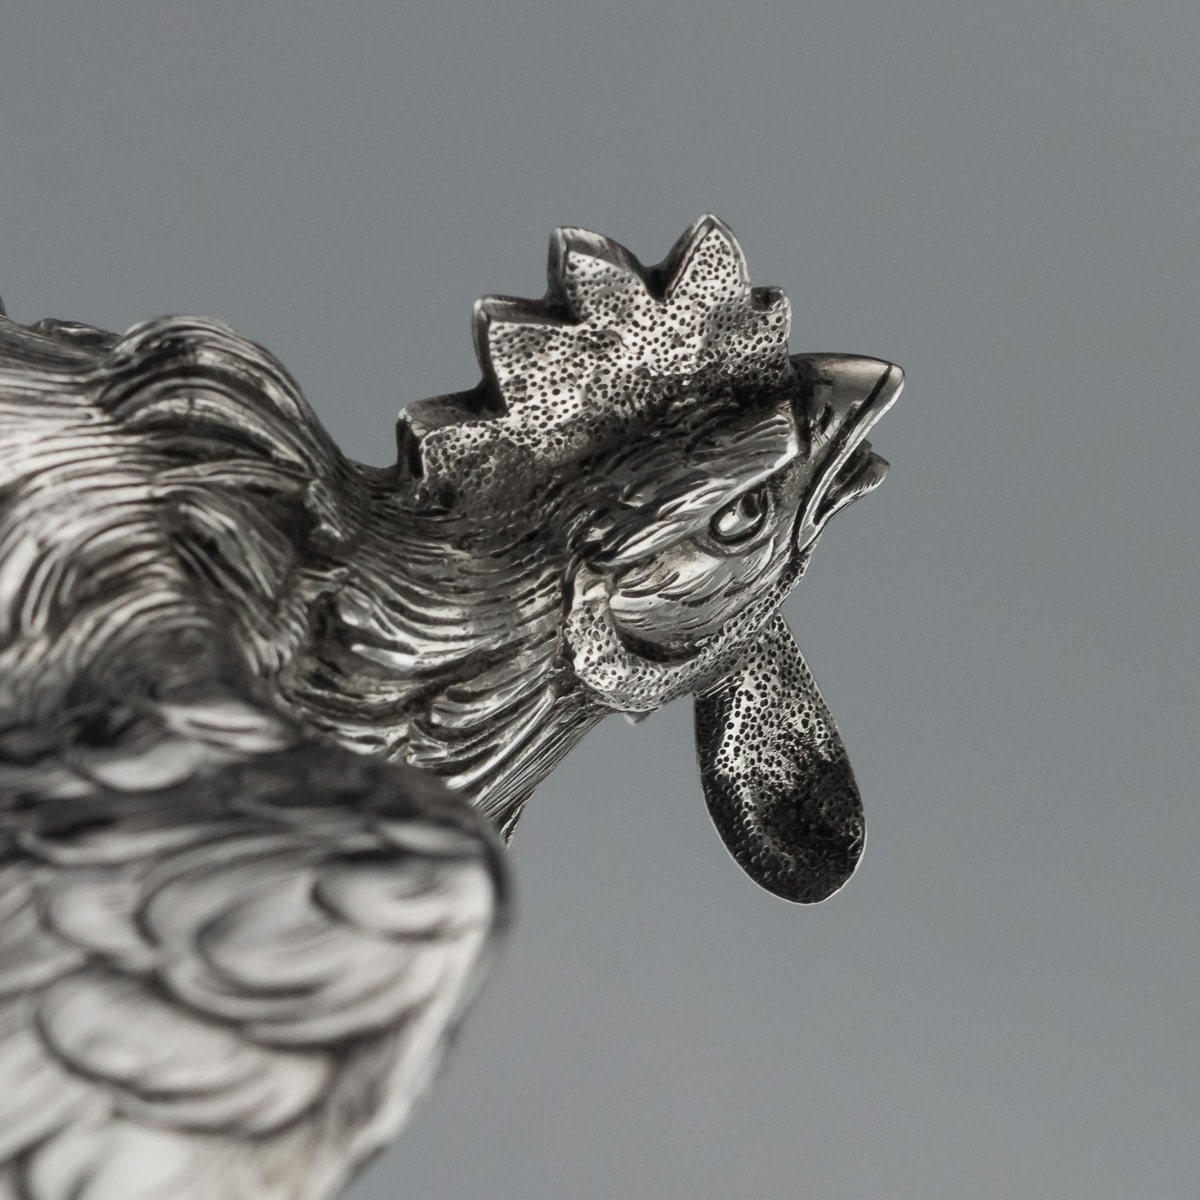 A PAIR OF GERMAN SILVER TABLE ORNAMENTS MODELLED AS FIGHTING COCKERELS - Image 40 of 41